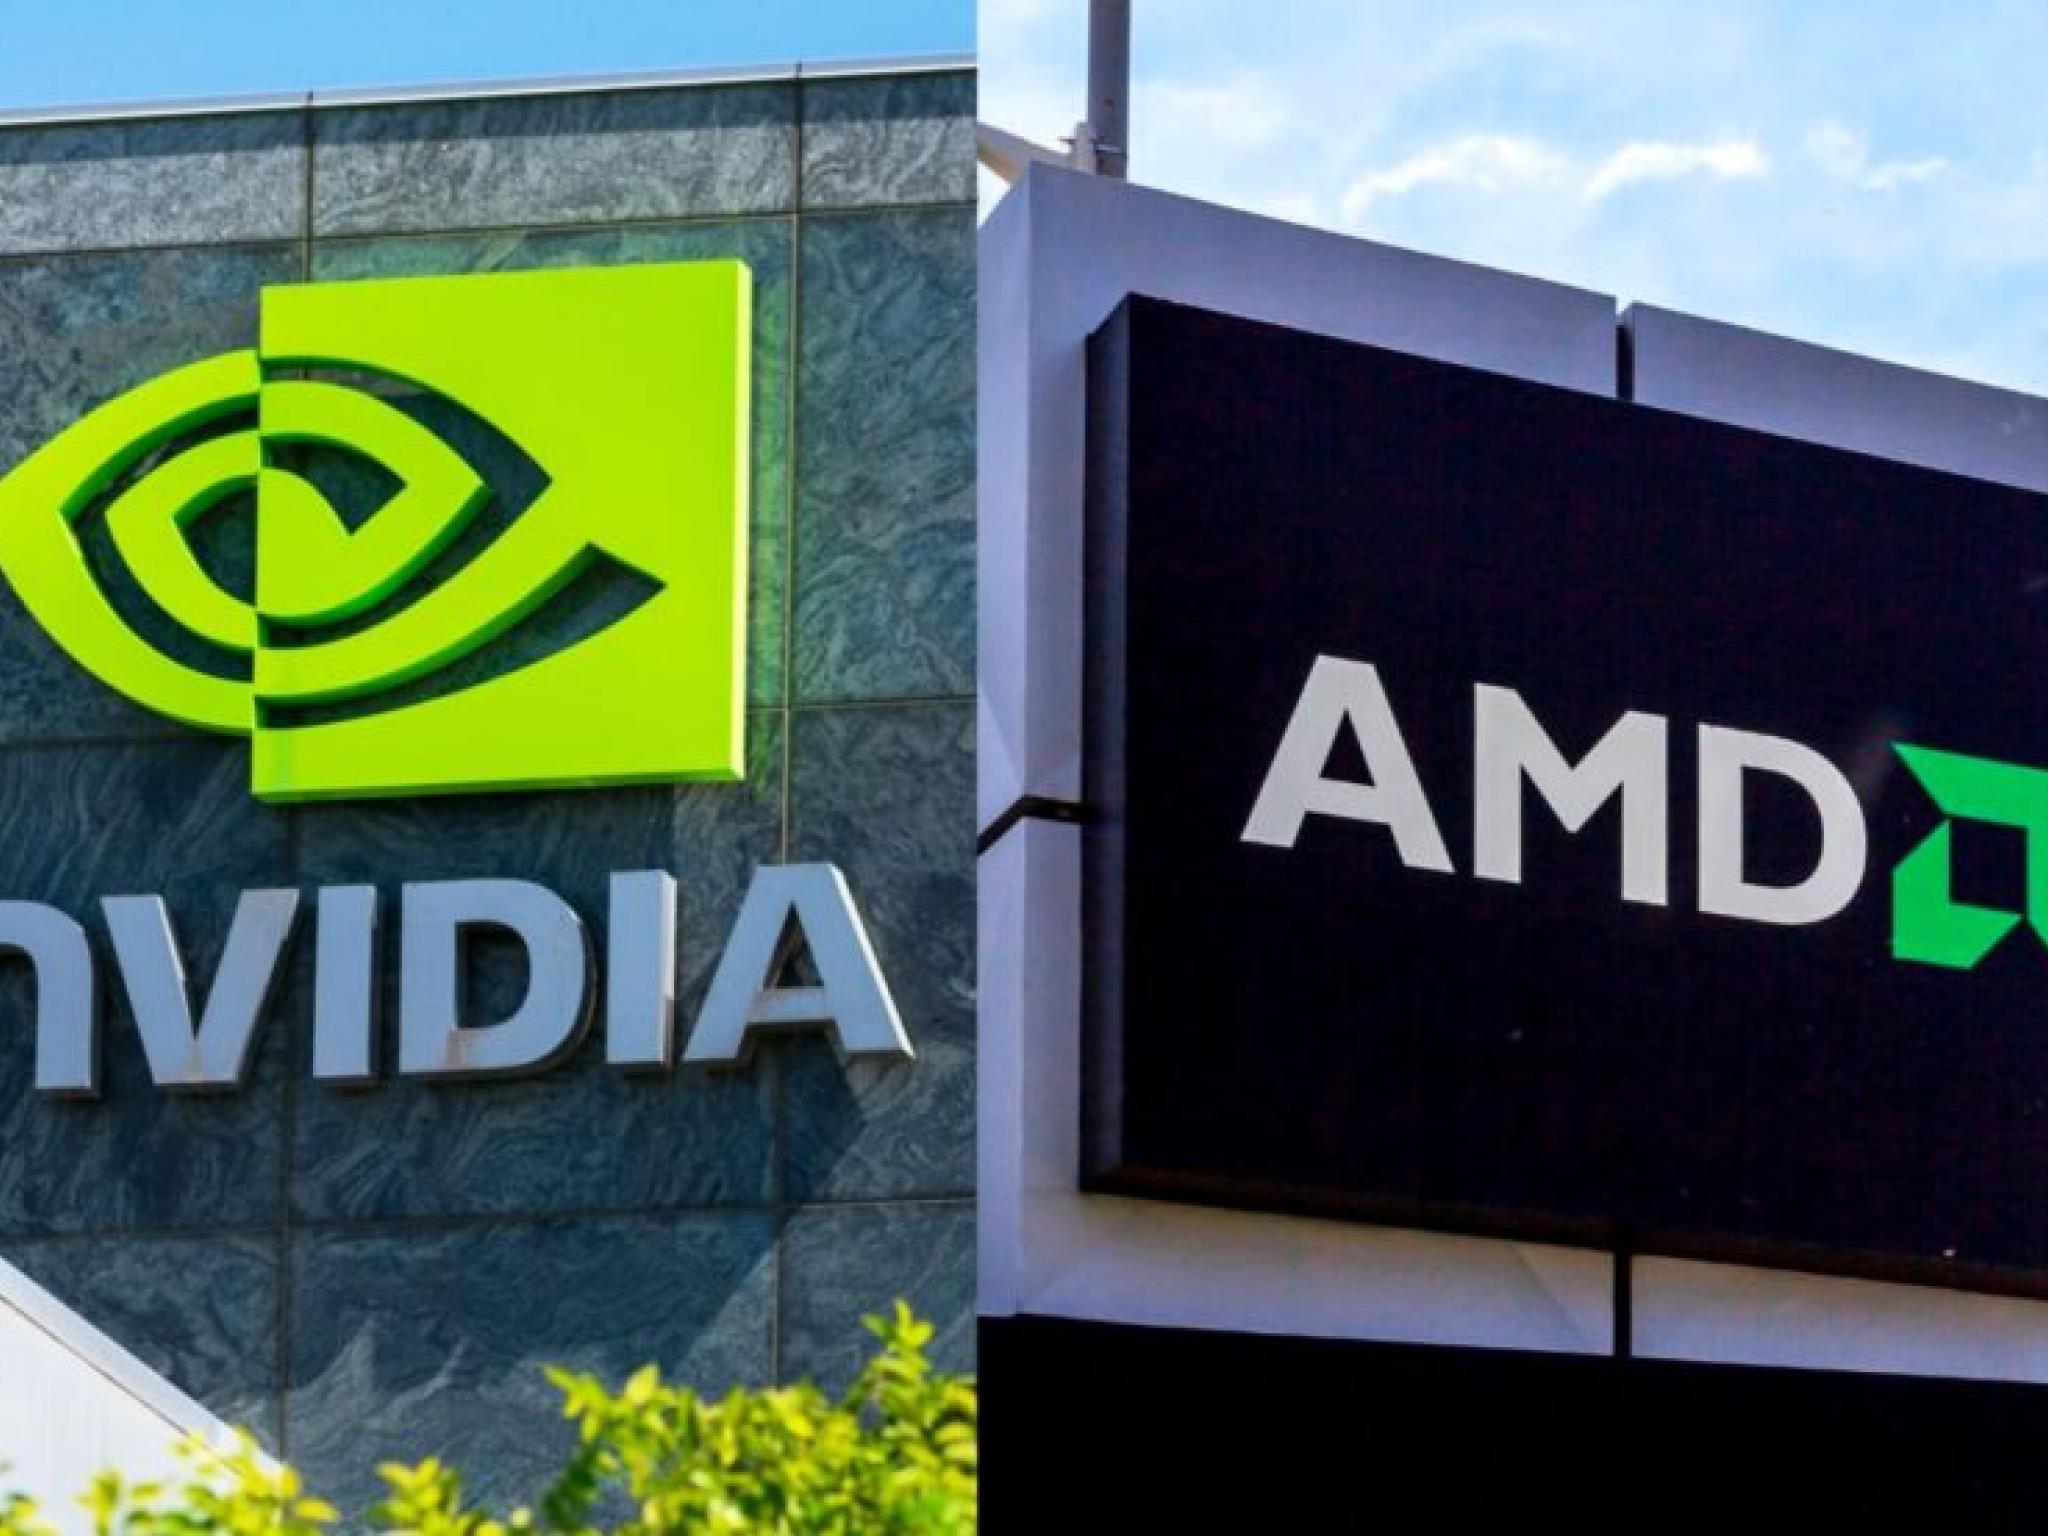  whats-going-on-with-key-ai-stocks-amd-intel-nvidia-on-friday 